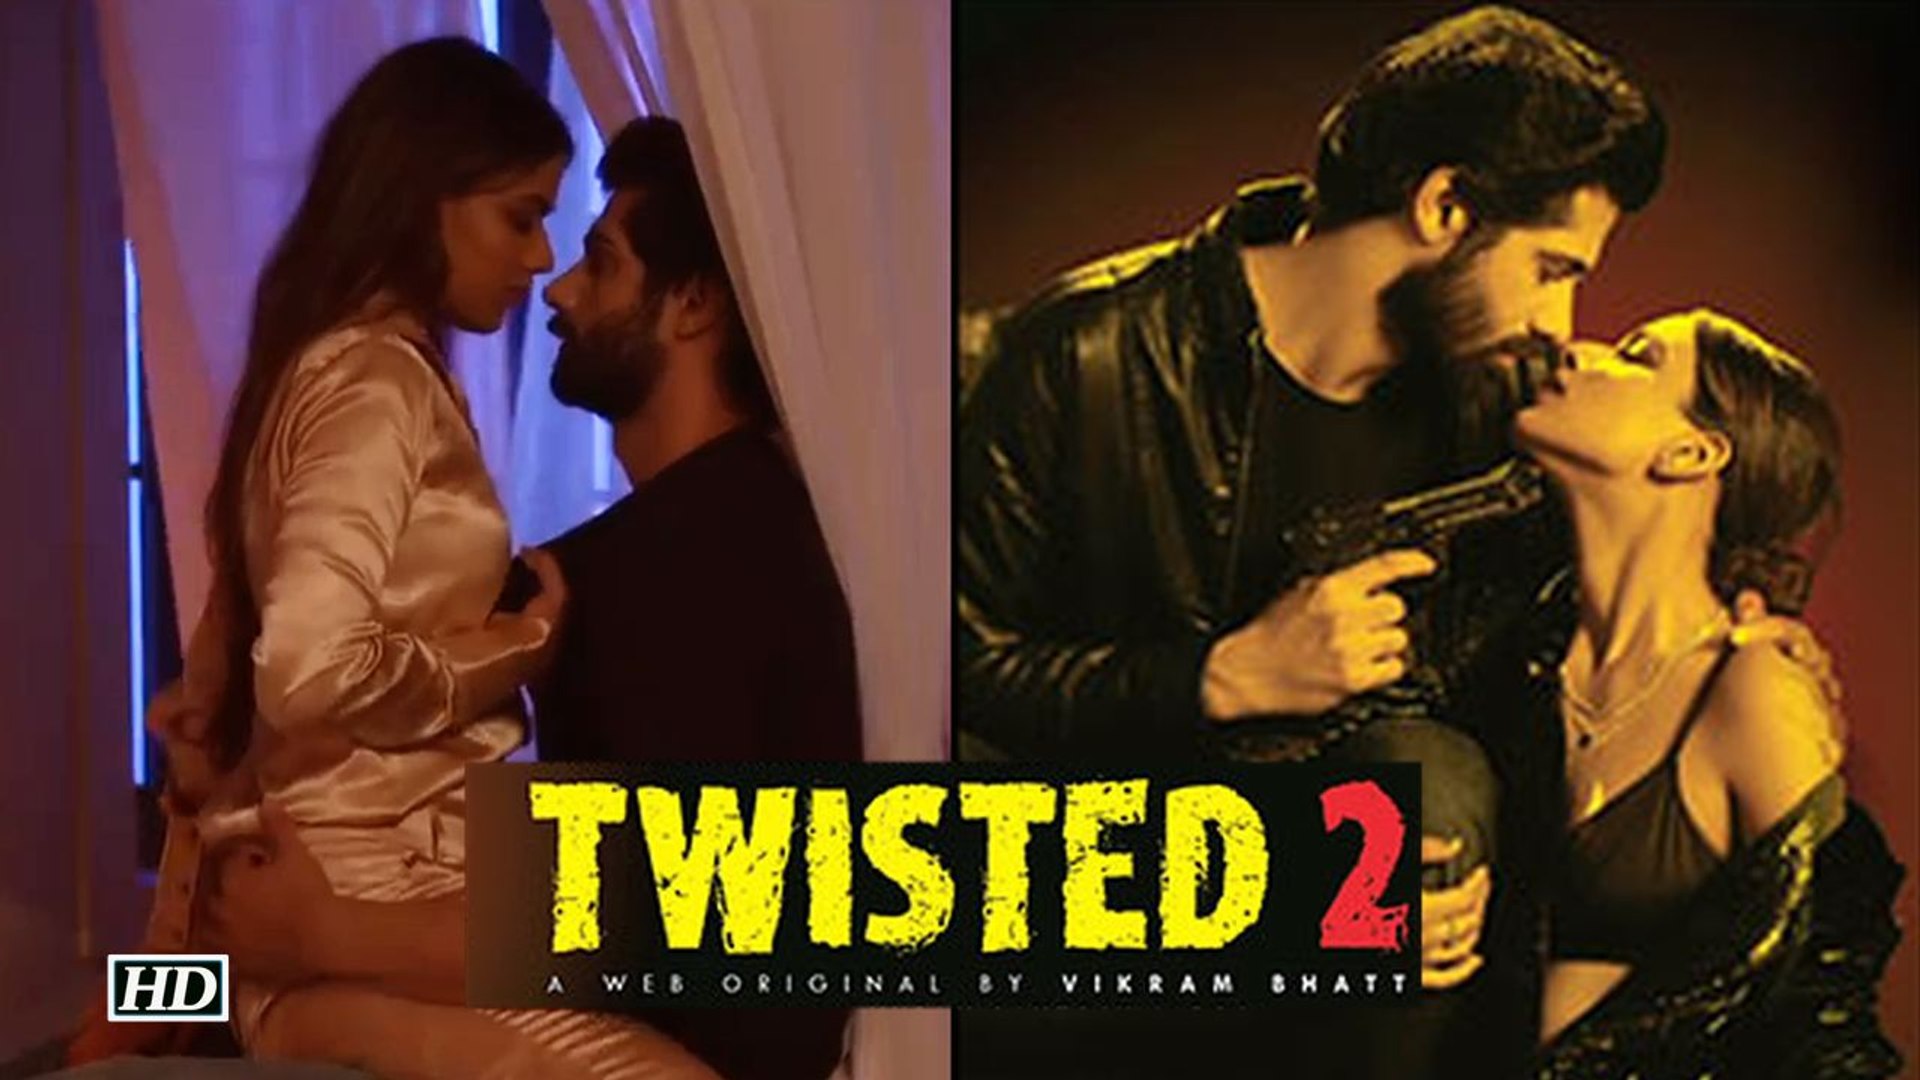 Twisted 2 Trailer | Nia Sharma is back with her BOLD avatar - video  Dailymotion